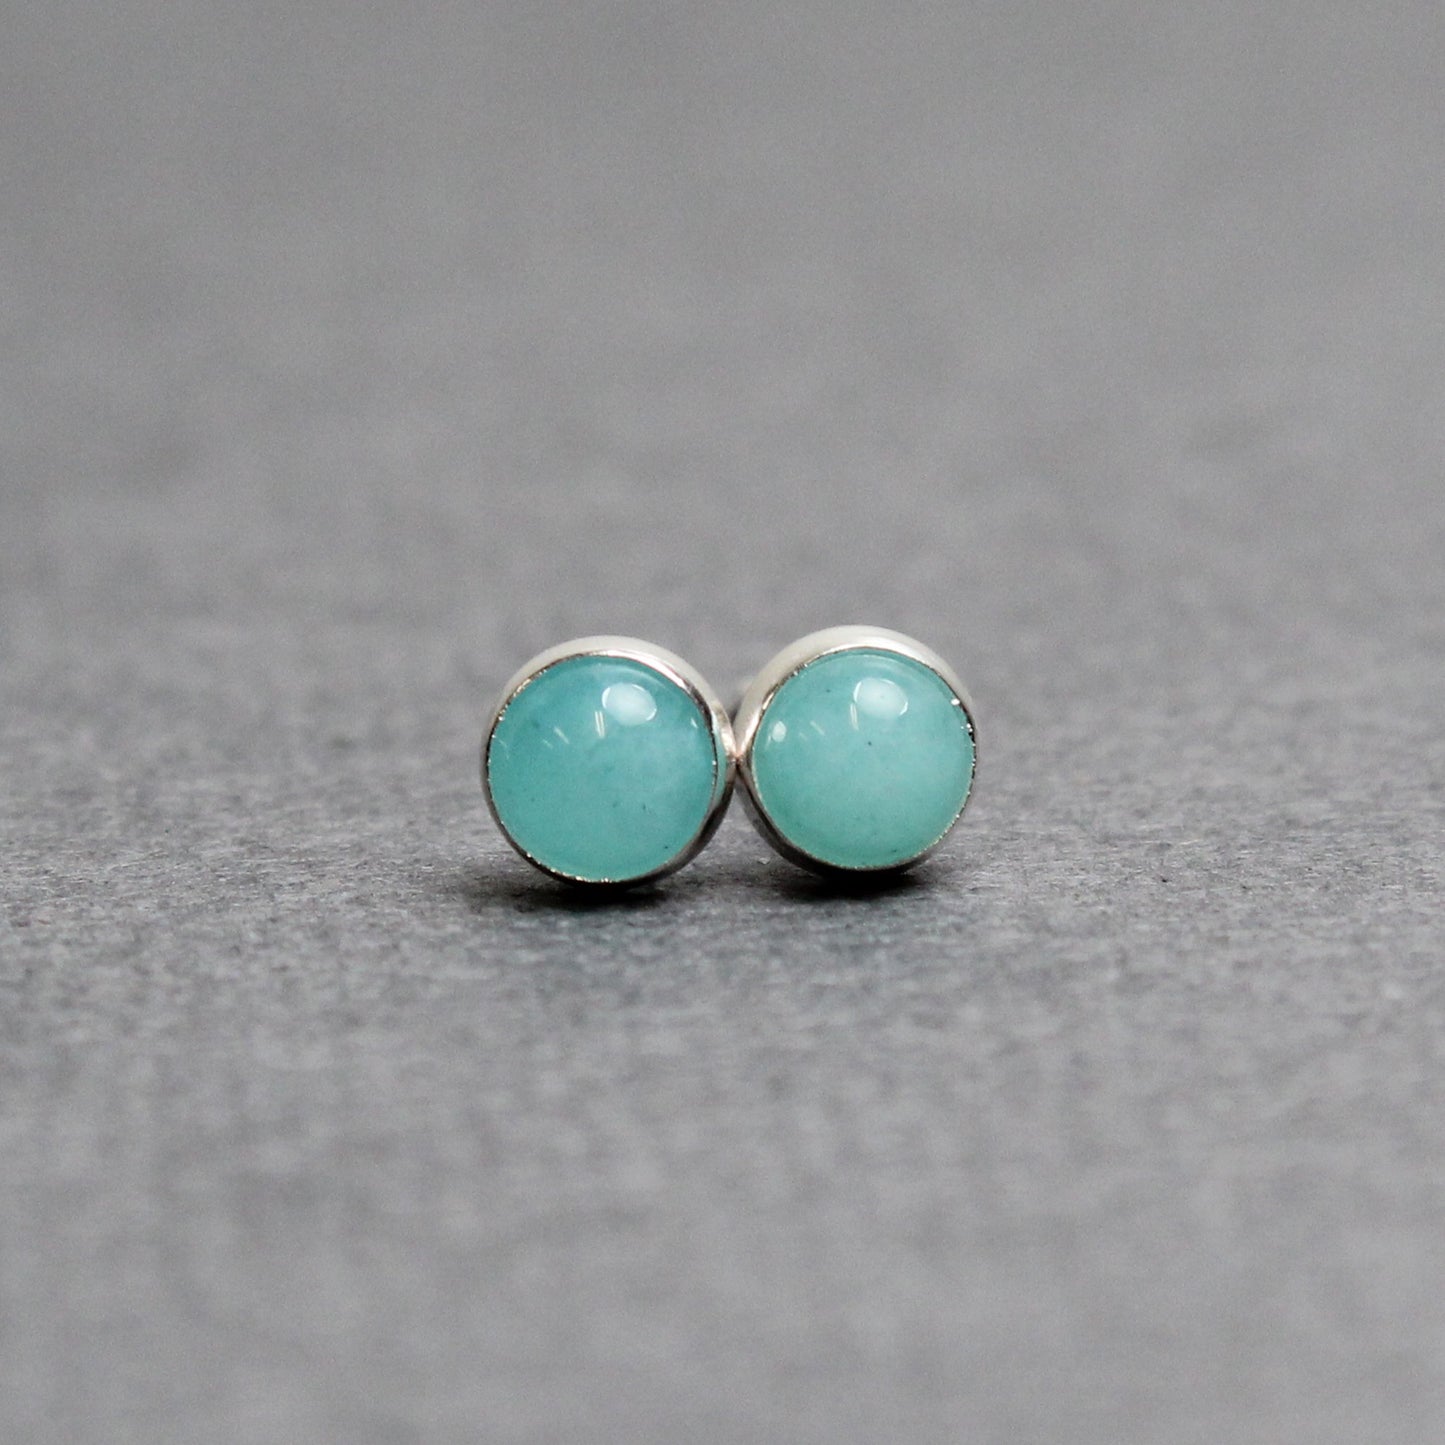 Load image into Gallery viewer, Amazonite Stud Earrings, Small 4mm in Sterling Silver
